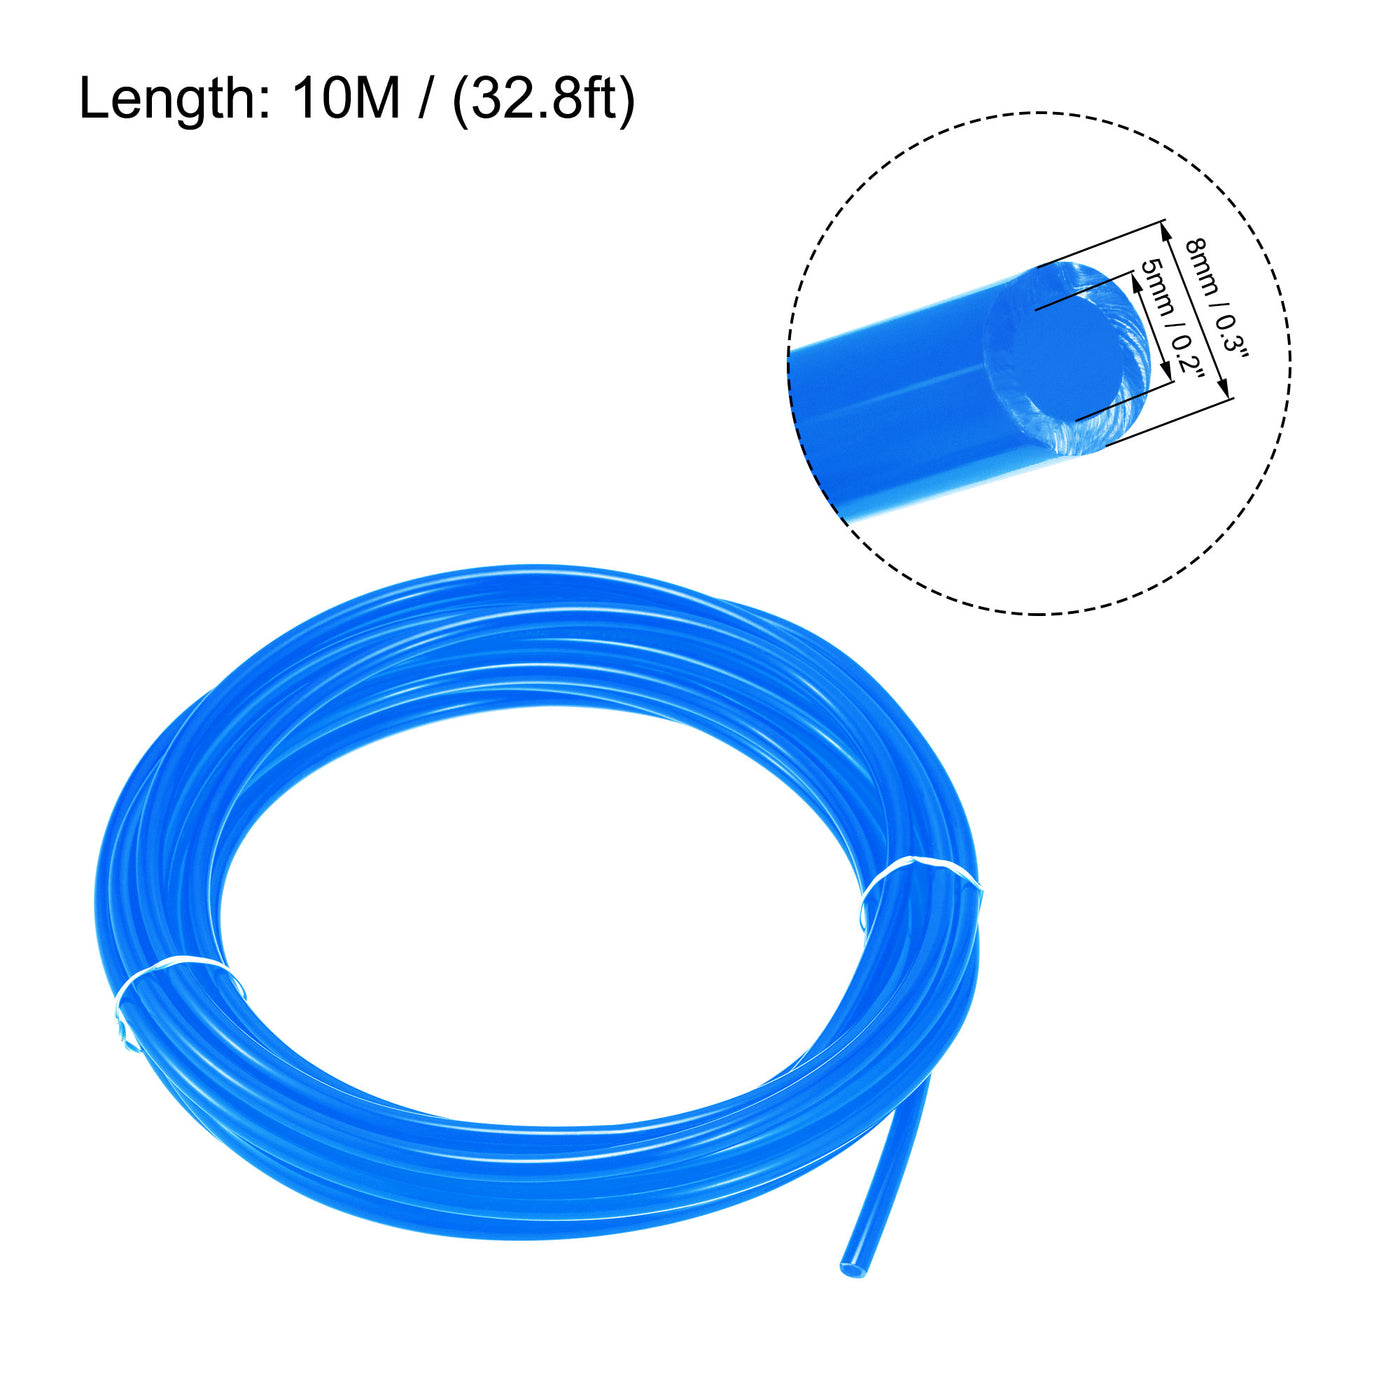 uxcell Uxcell Pneumatic Air Hose Tubing PU Air Compressor Tube 5mm/0.2''ID x 8mm/0.3''OD x 10m/32.8Ft Polyurethane Pipe Blue with Connect Fitting Kit